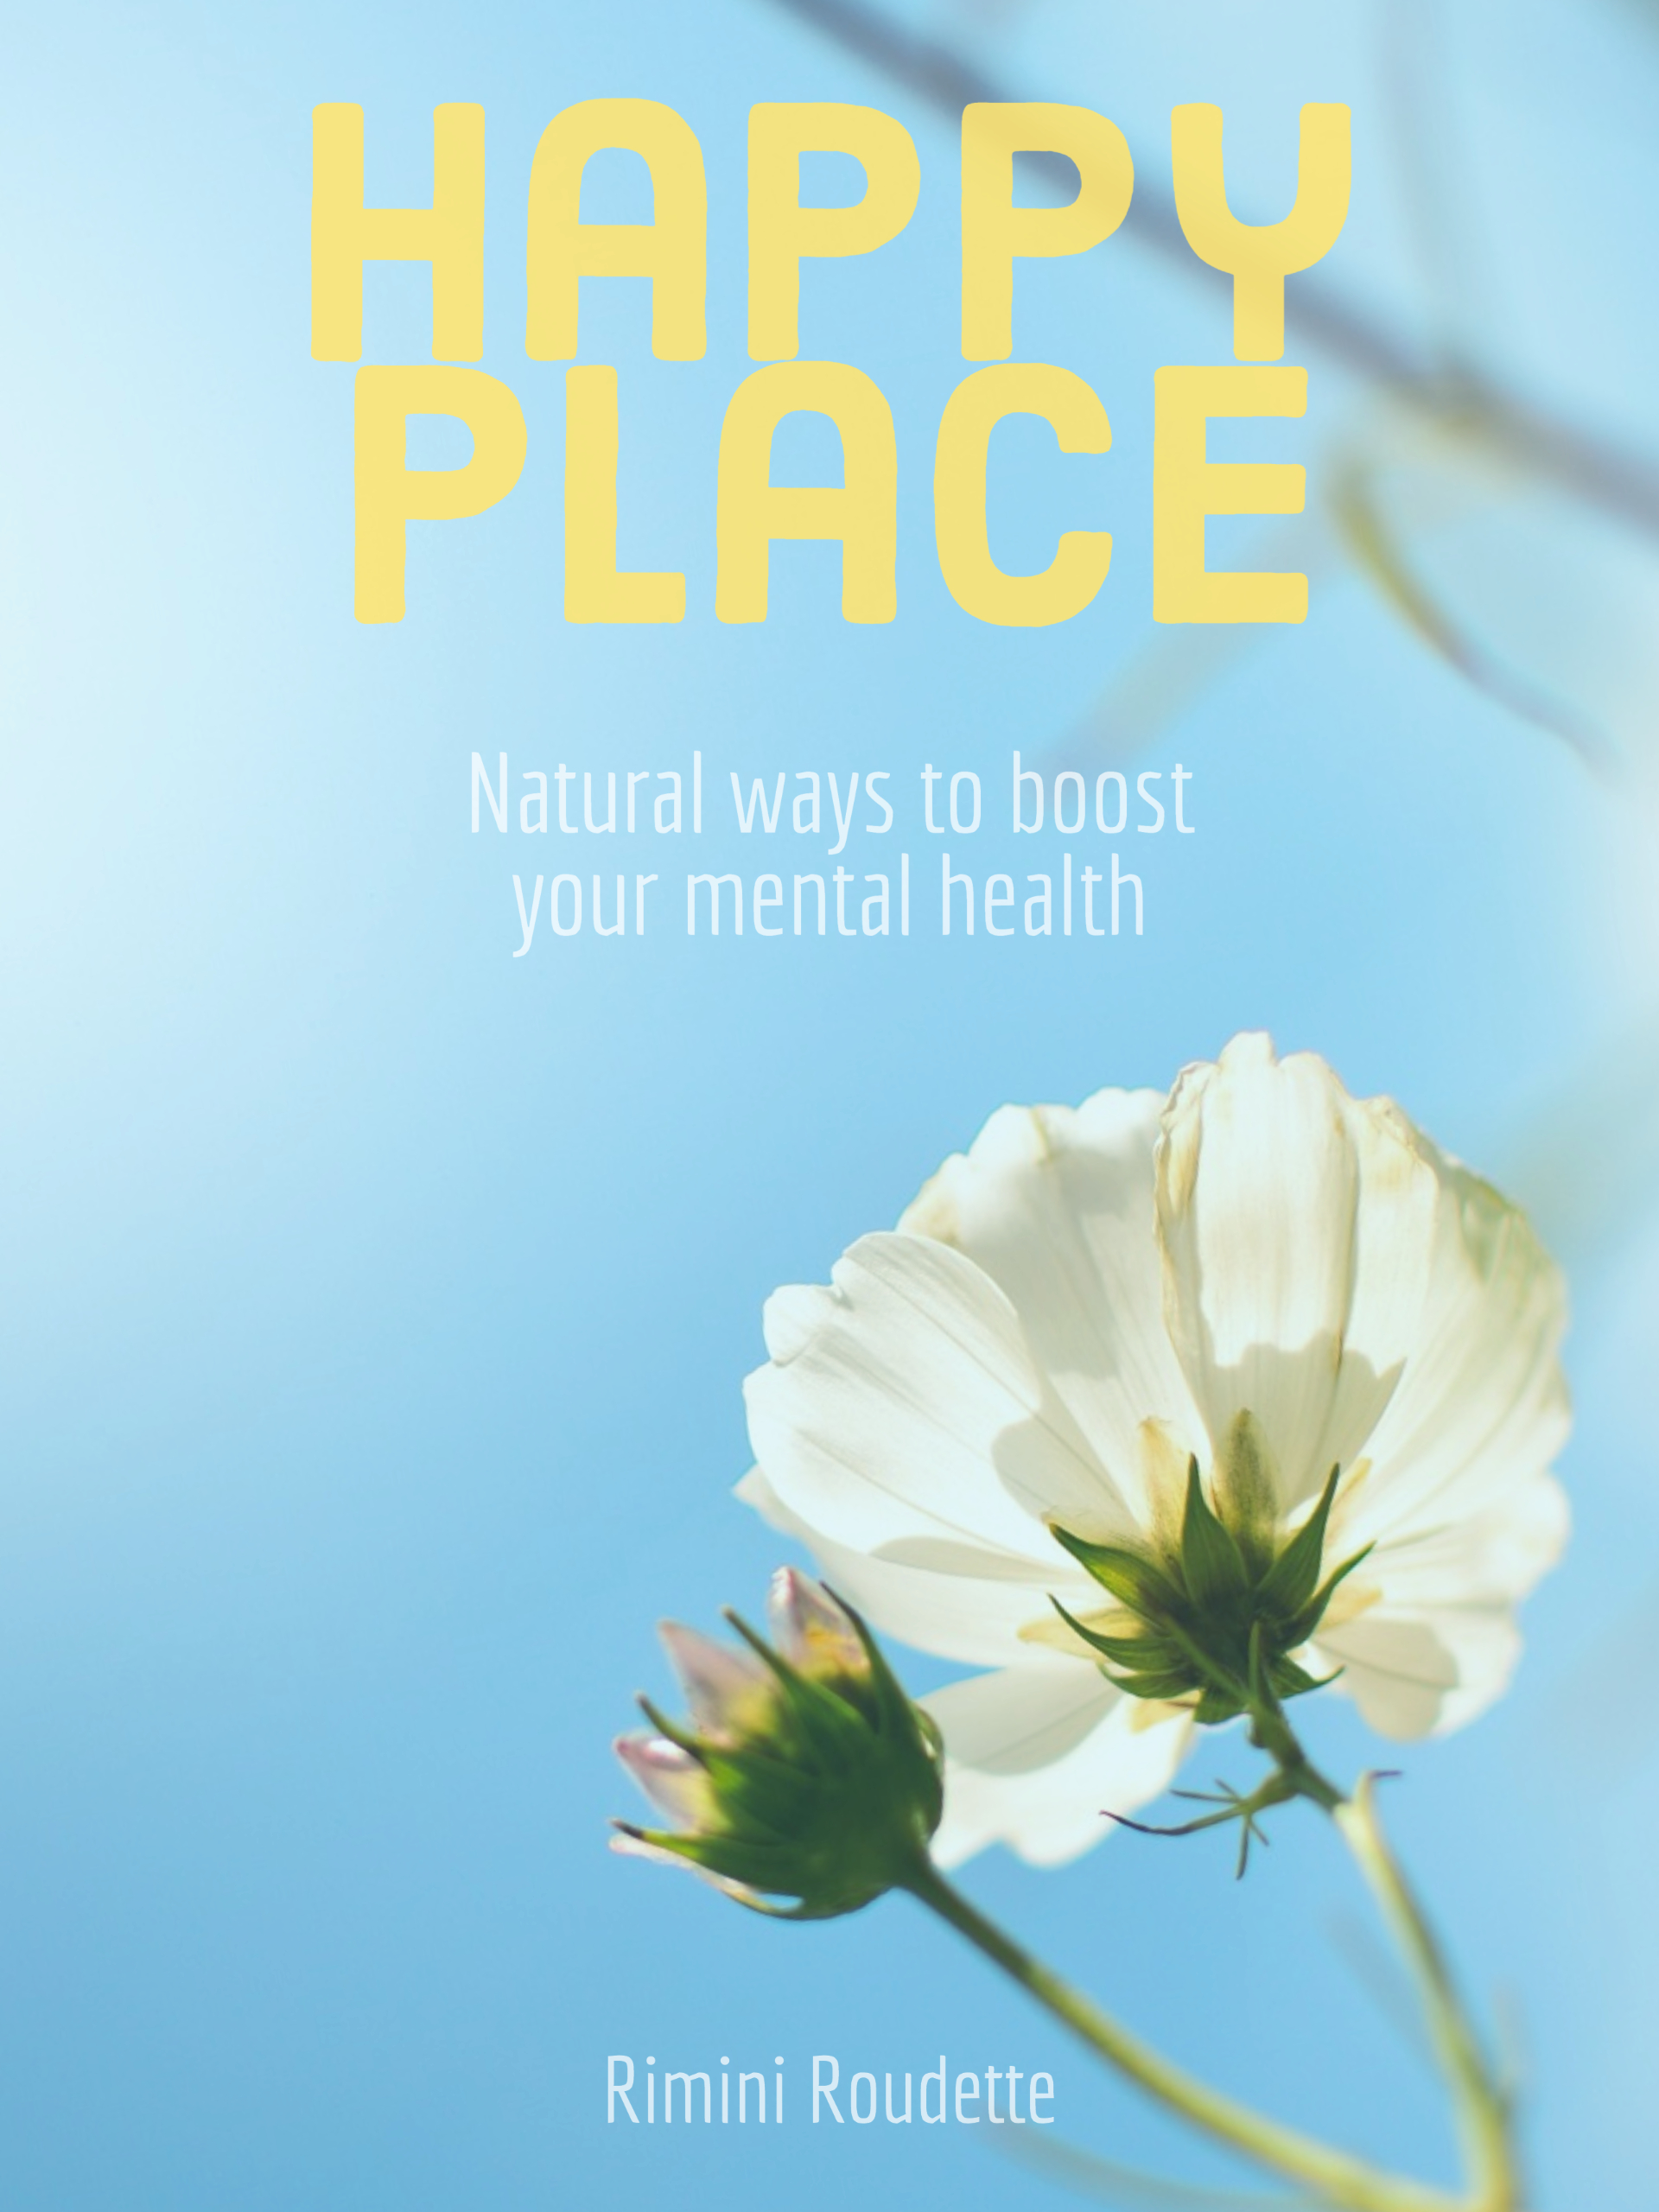 Find Your Happy Place…. 15 Natural Ways to Boost Your Mental Health